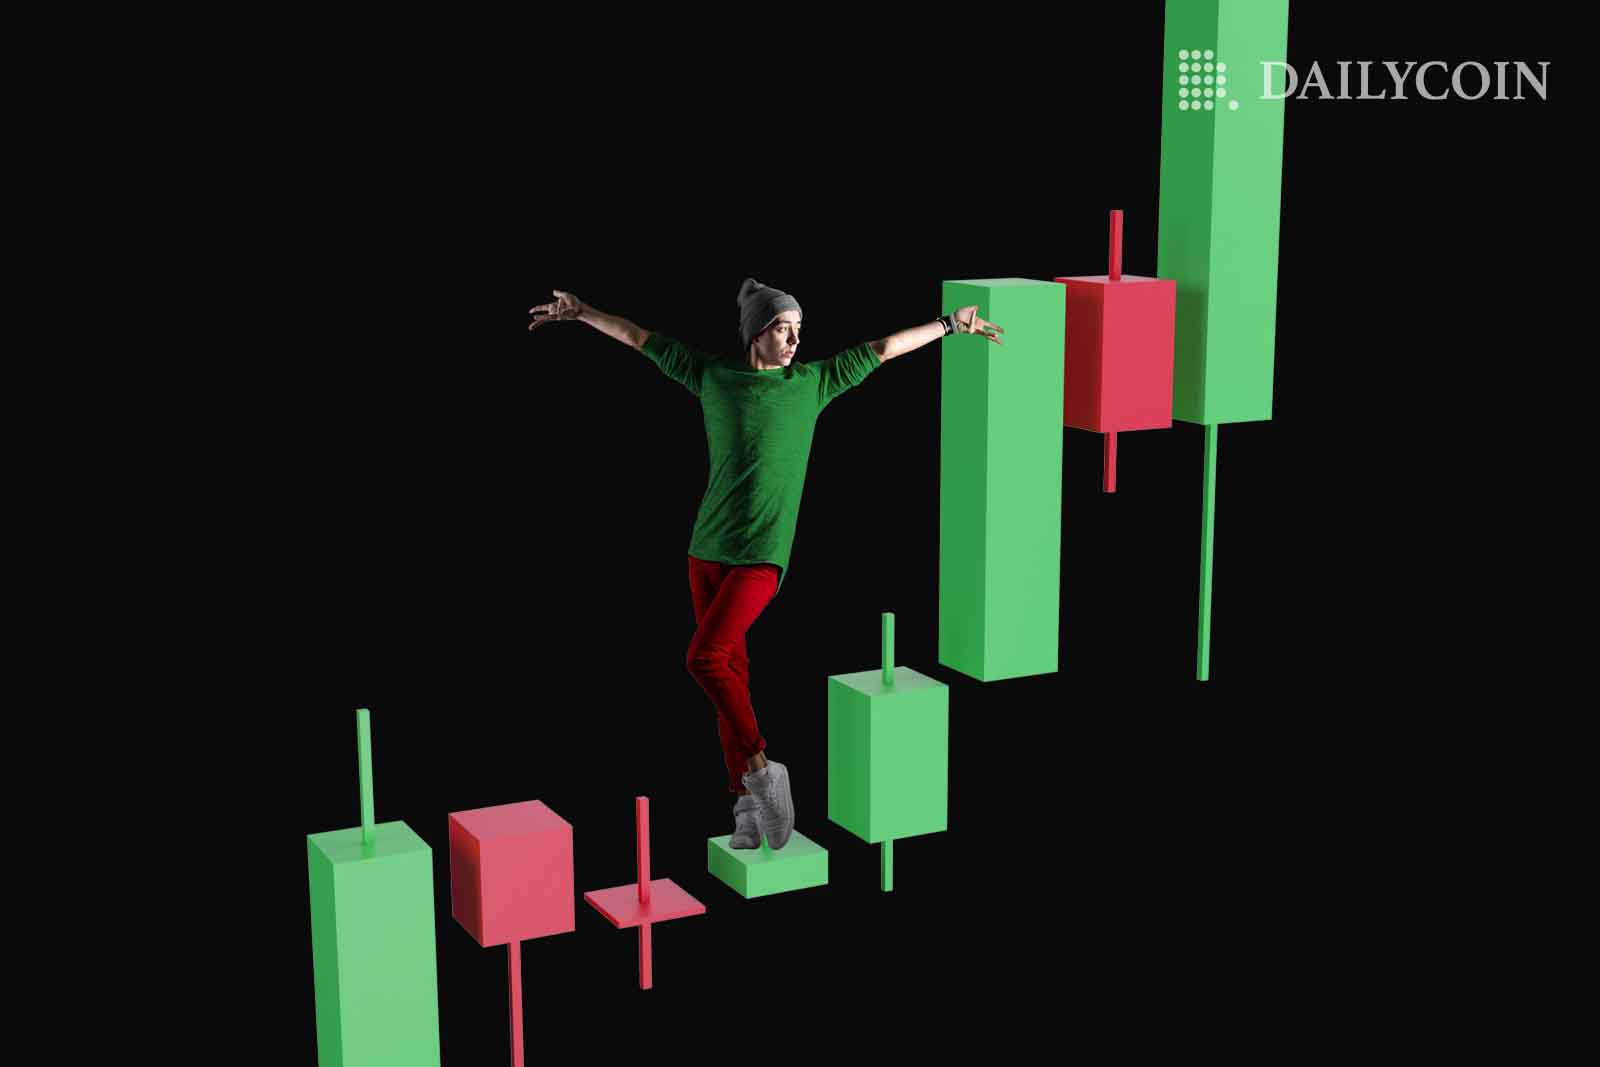 A man dressed in red and green dancing on a candlestick chart.